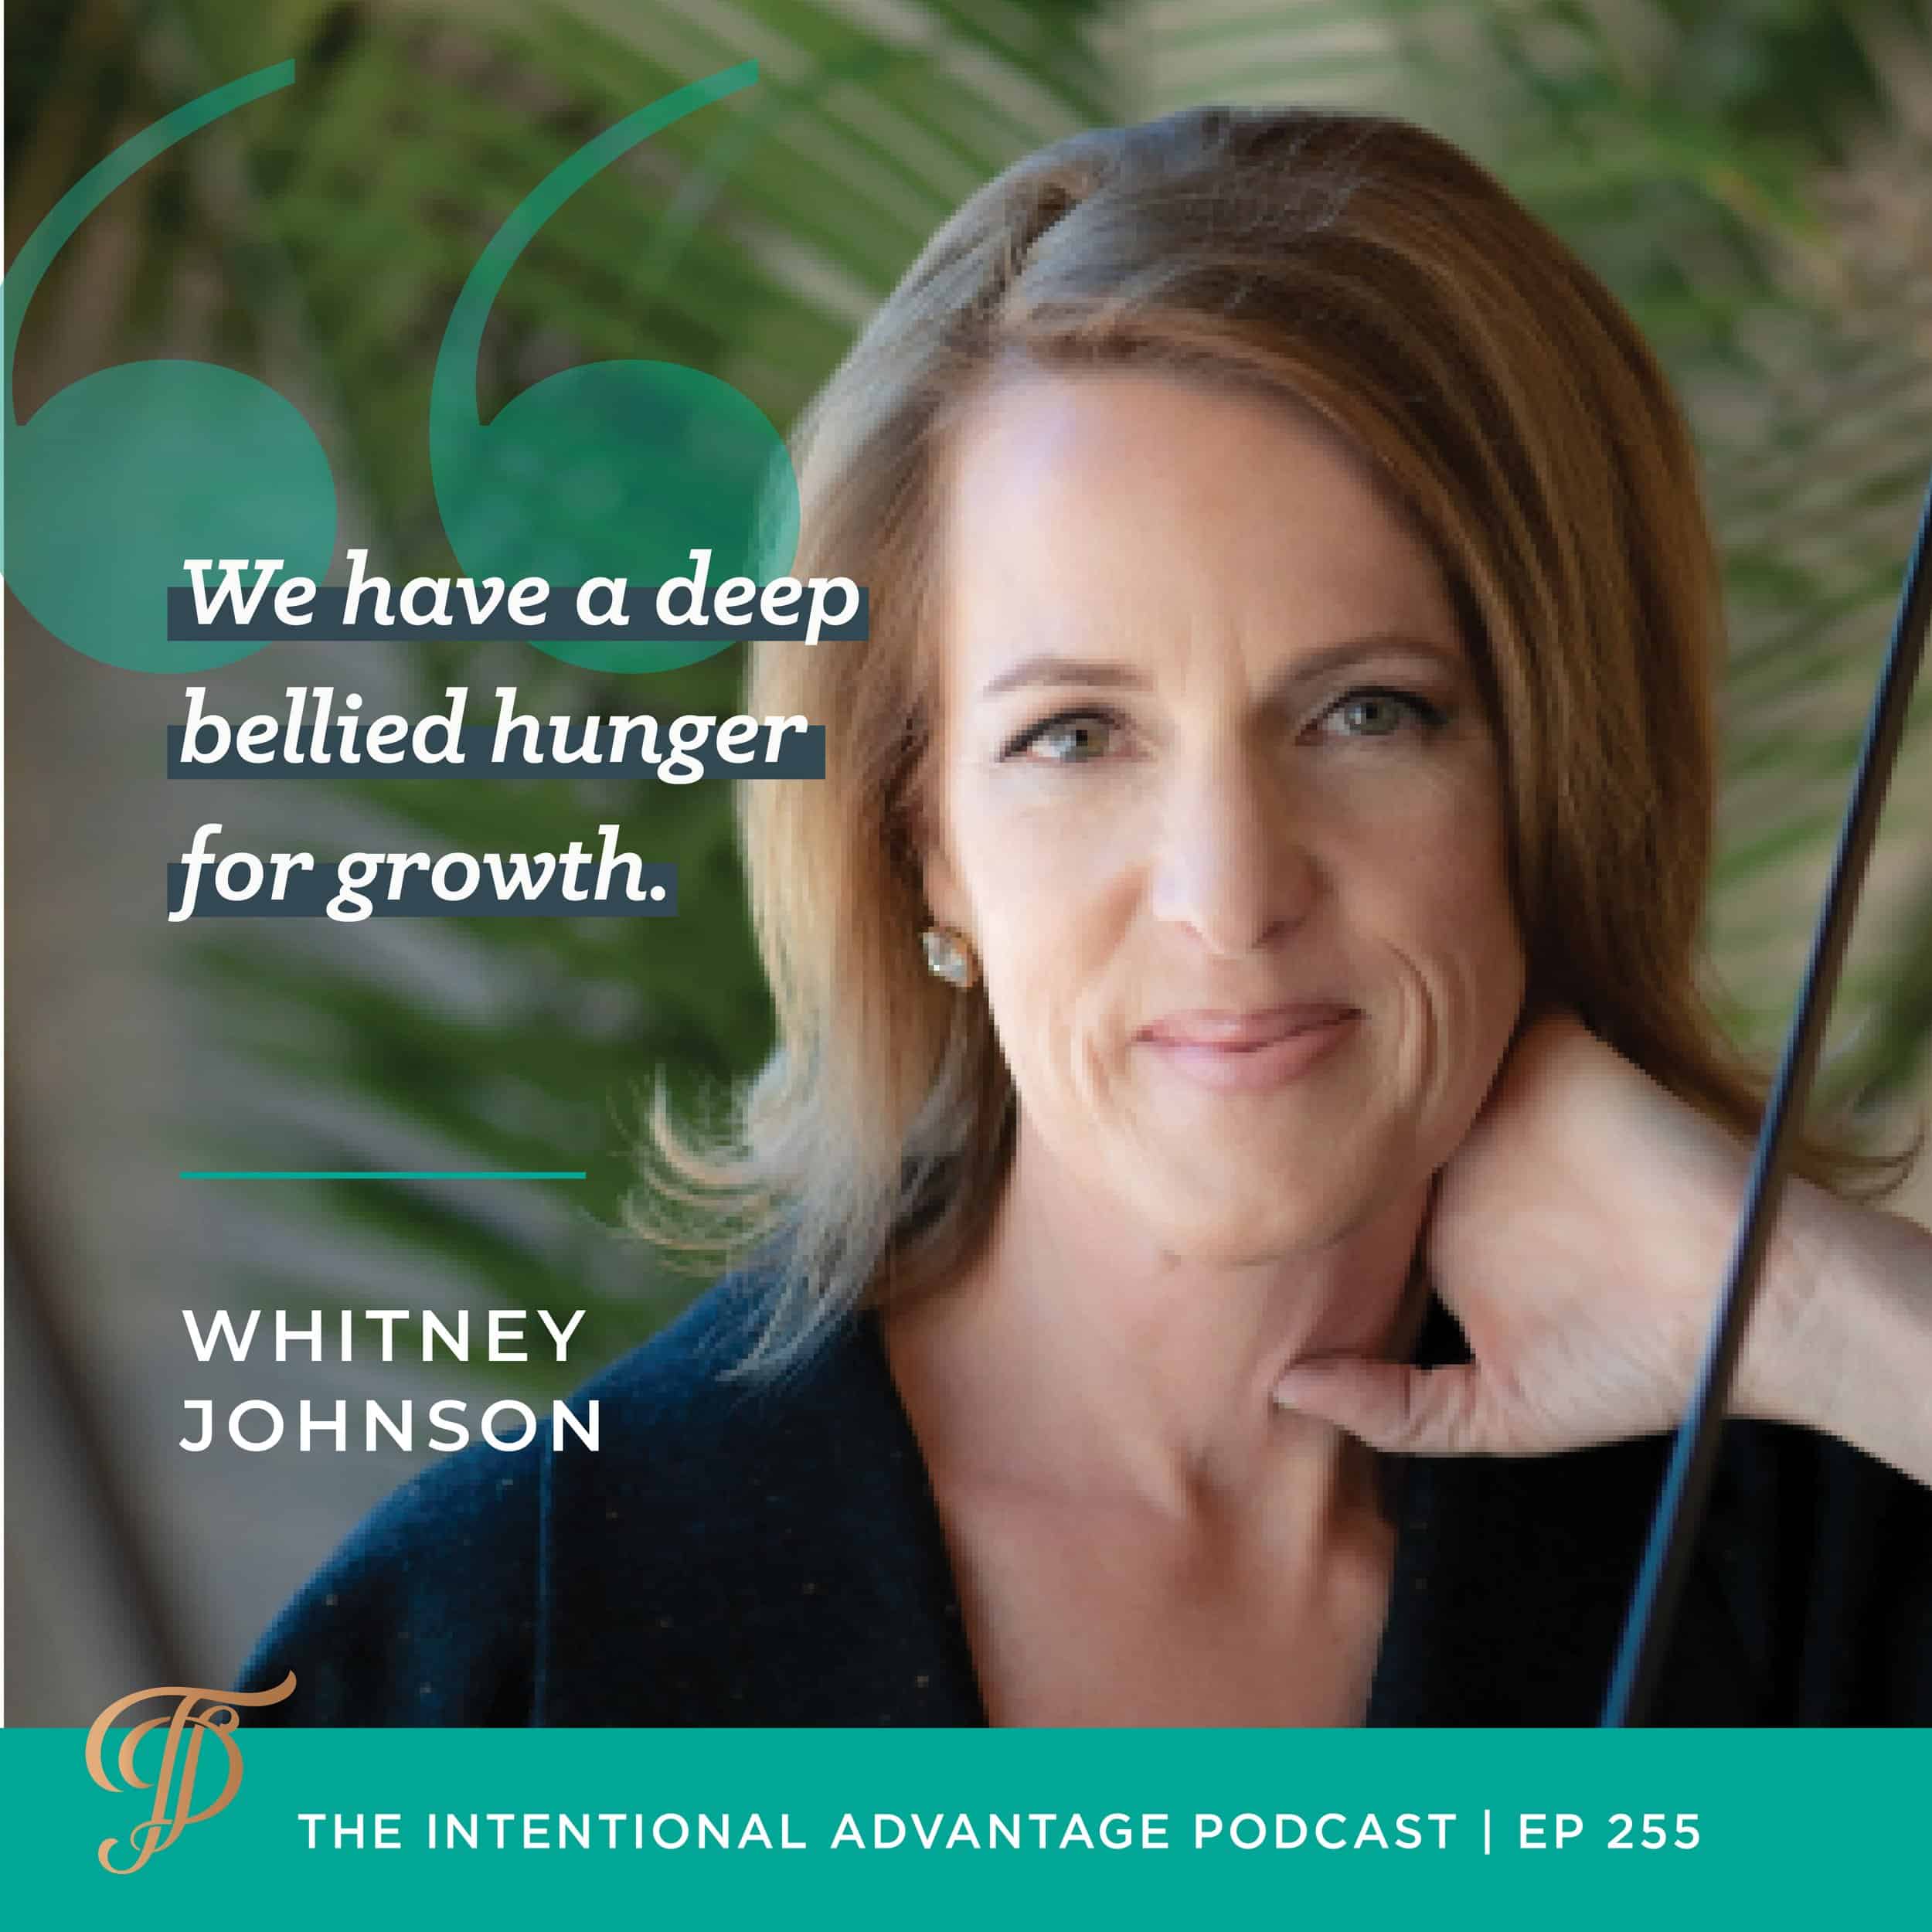 Whitney Johnson podcast interview on The Intentional Advantage